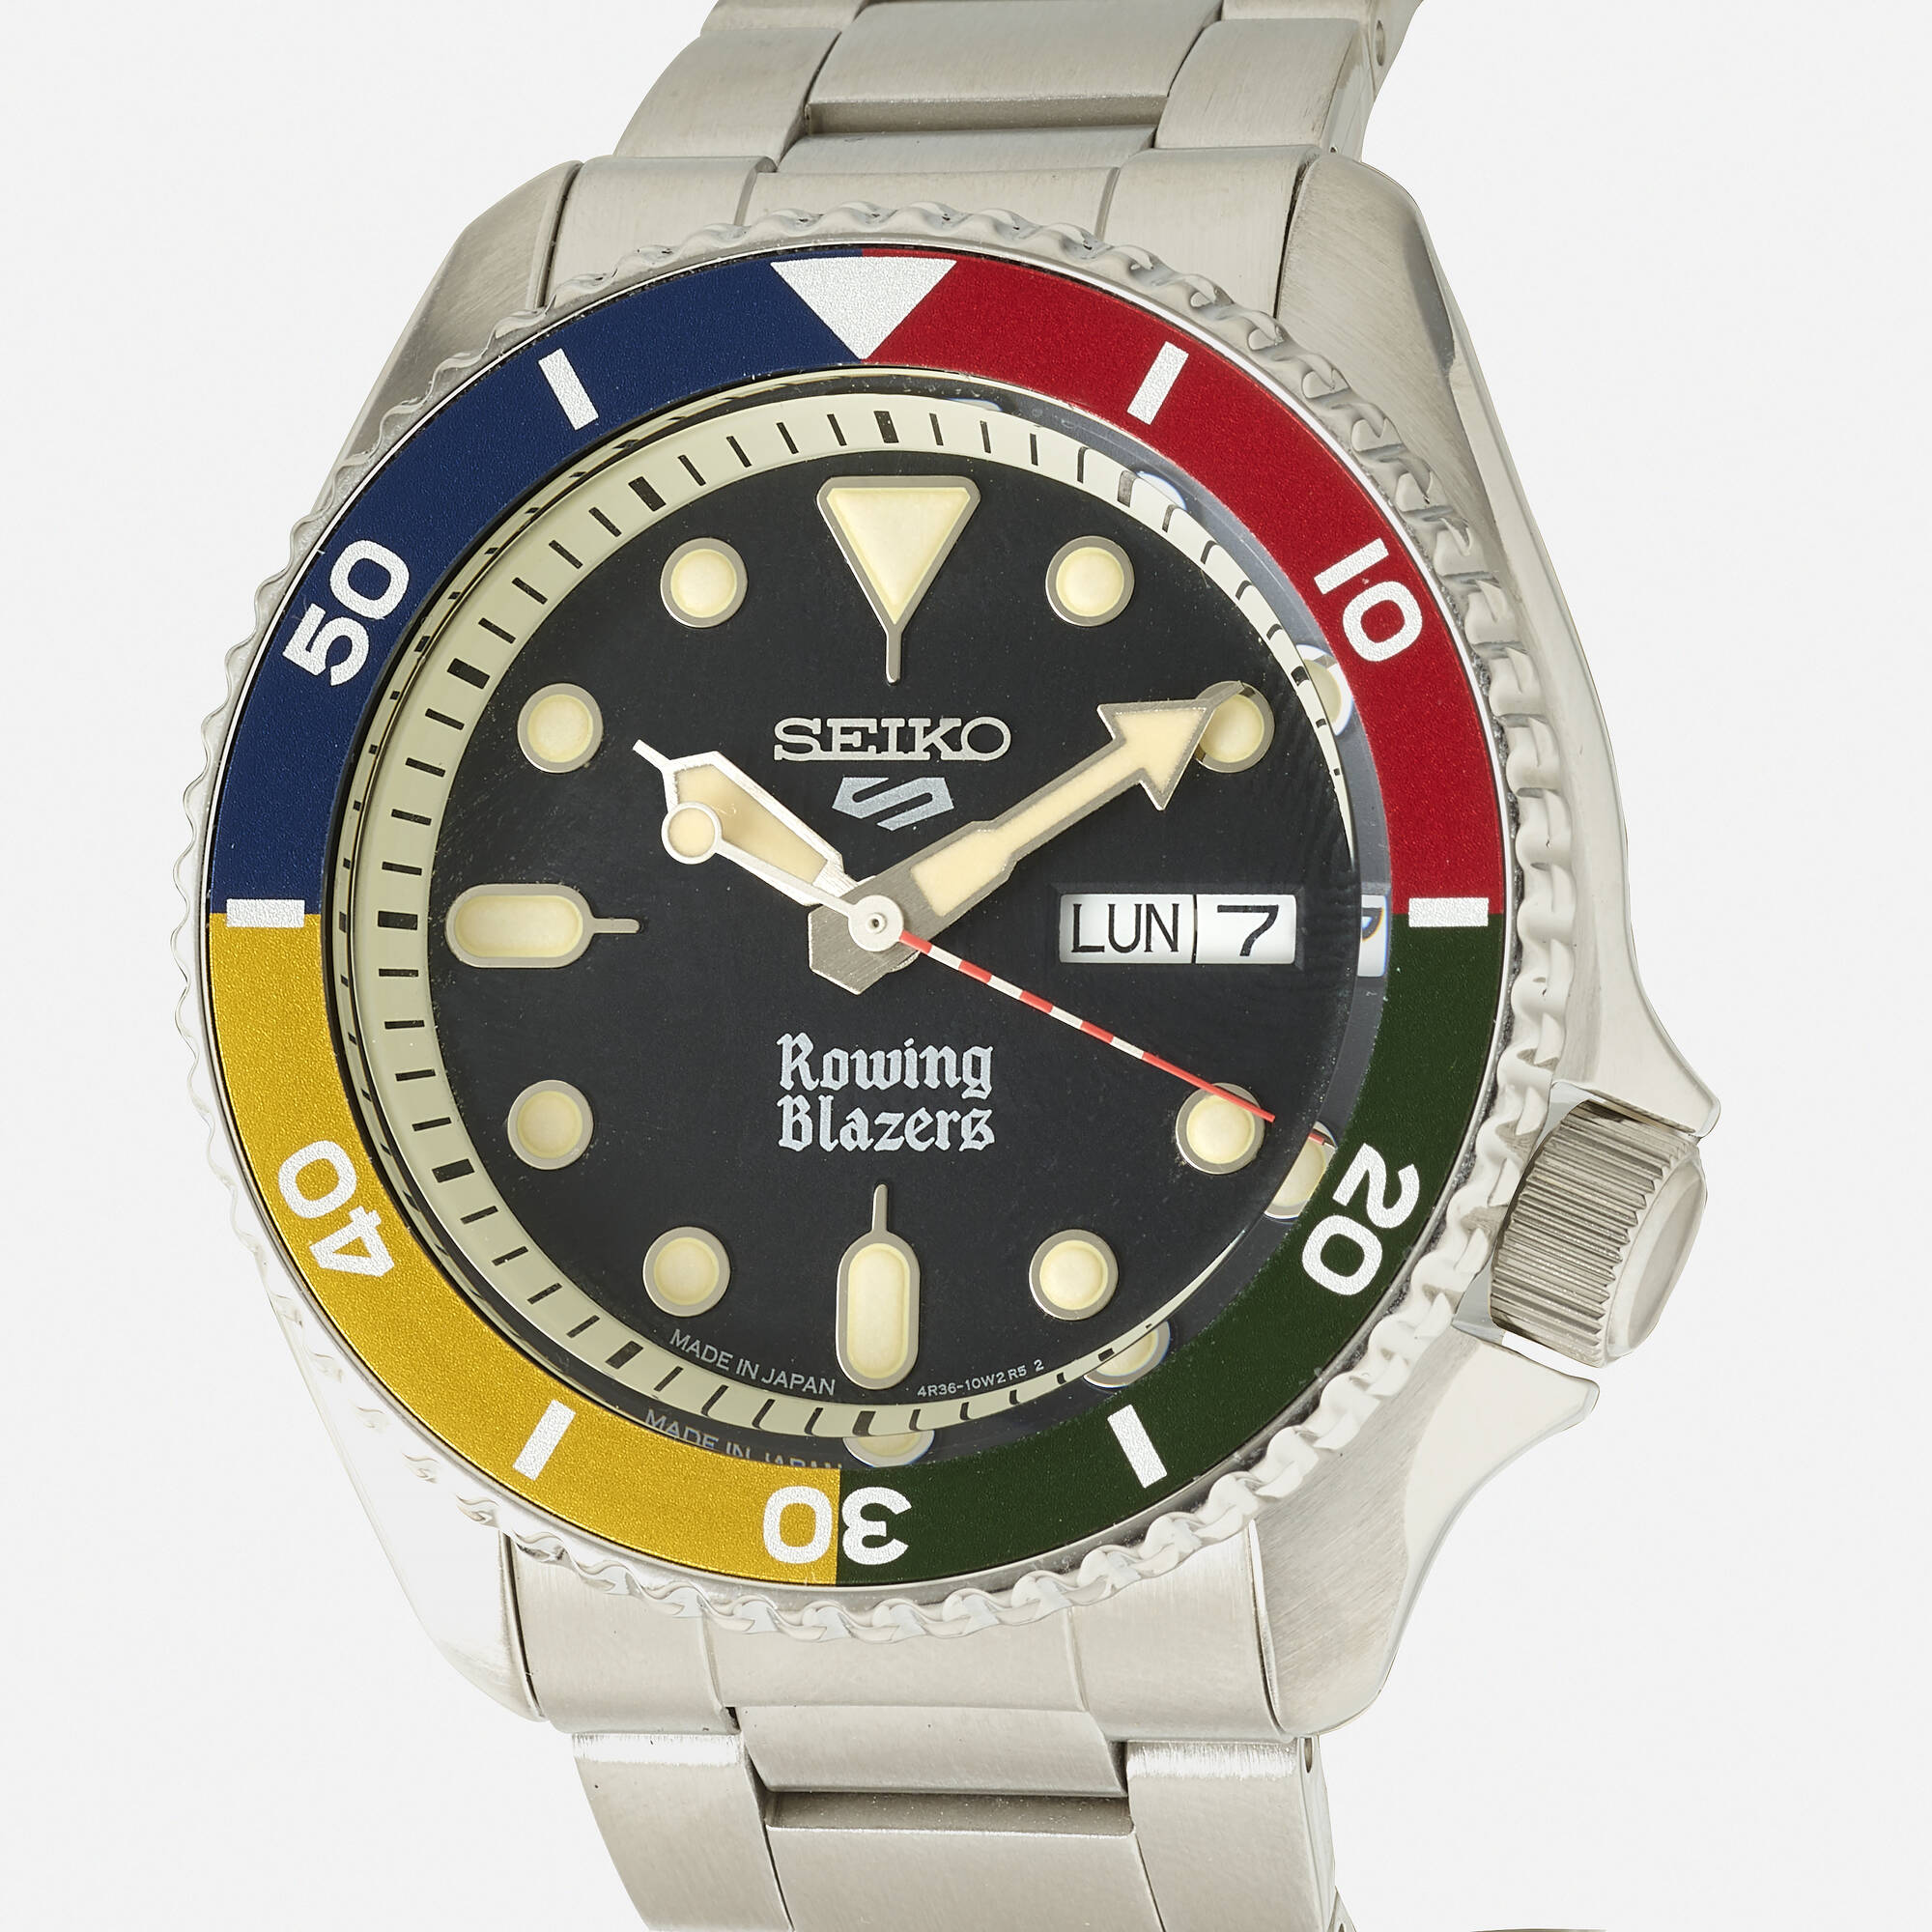 144: SEIKO FROM AJ MICHALKA, 'Rowing Blazers Diver' stainless steel  wristwatch < Watches including the Brian LaViolette Scholarship Foundation  Benefit Lots, 30 November 2022 < Auctions | Rago Auctions